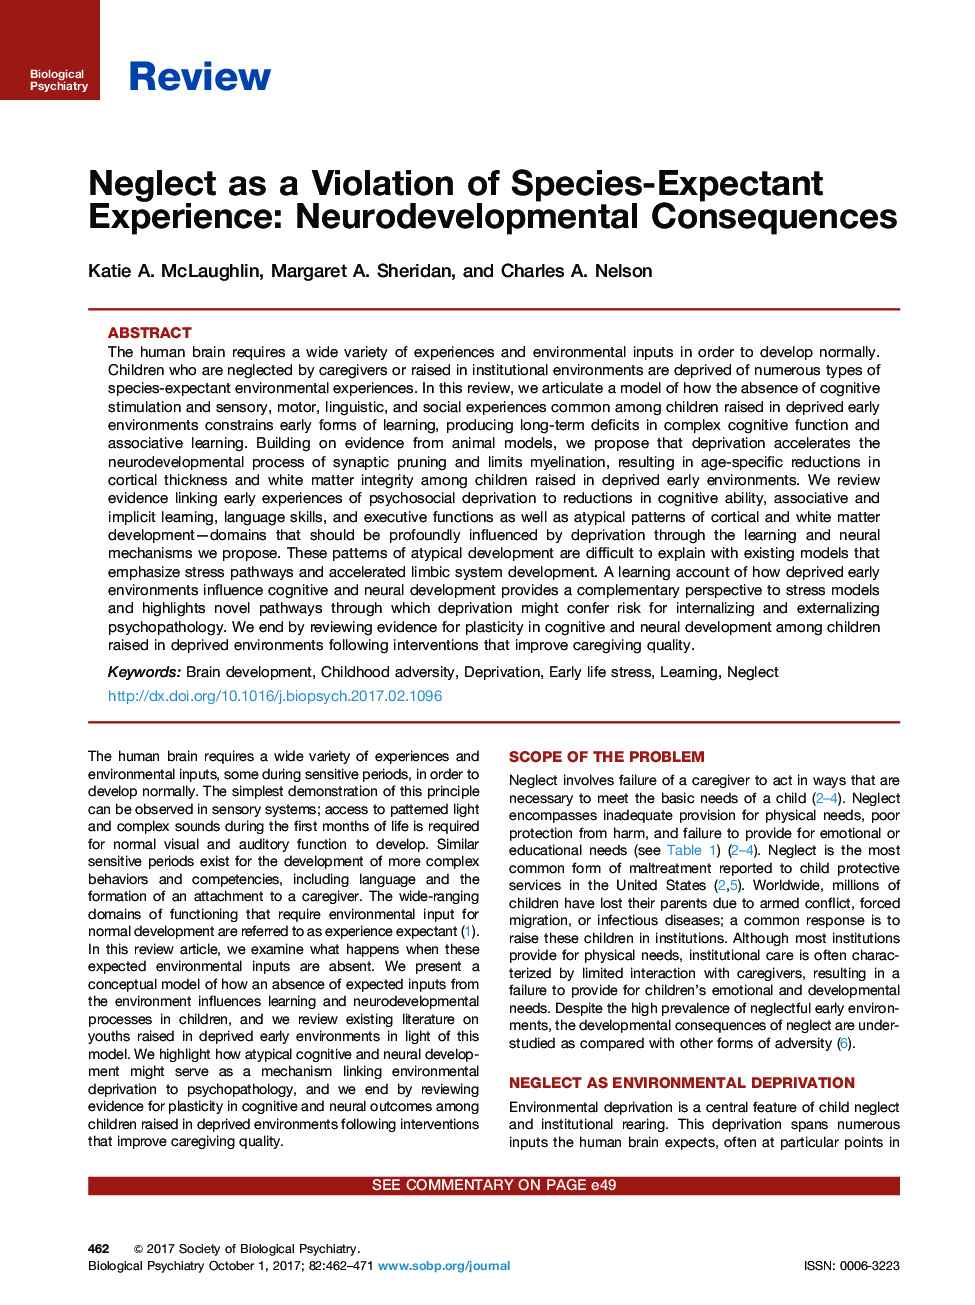 ReviewNeglect as a Violation of Species-Expectant Experience: Neurodevelopmental Consequences